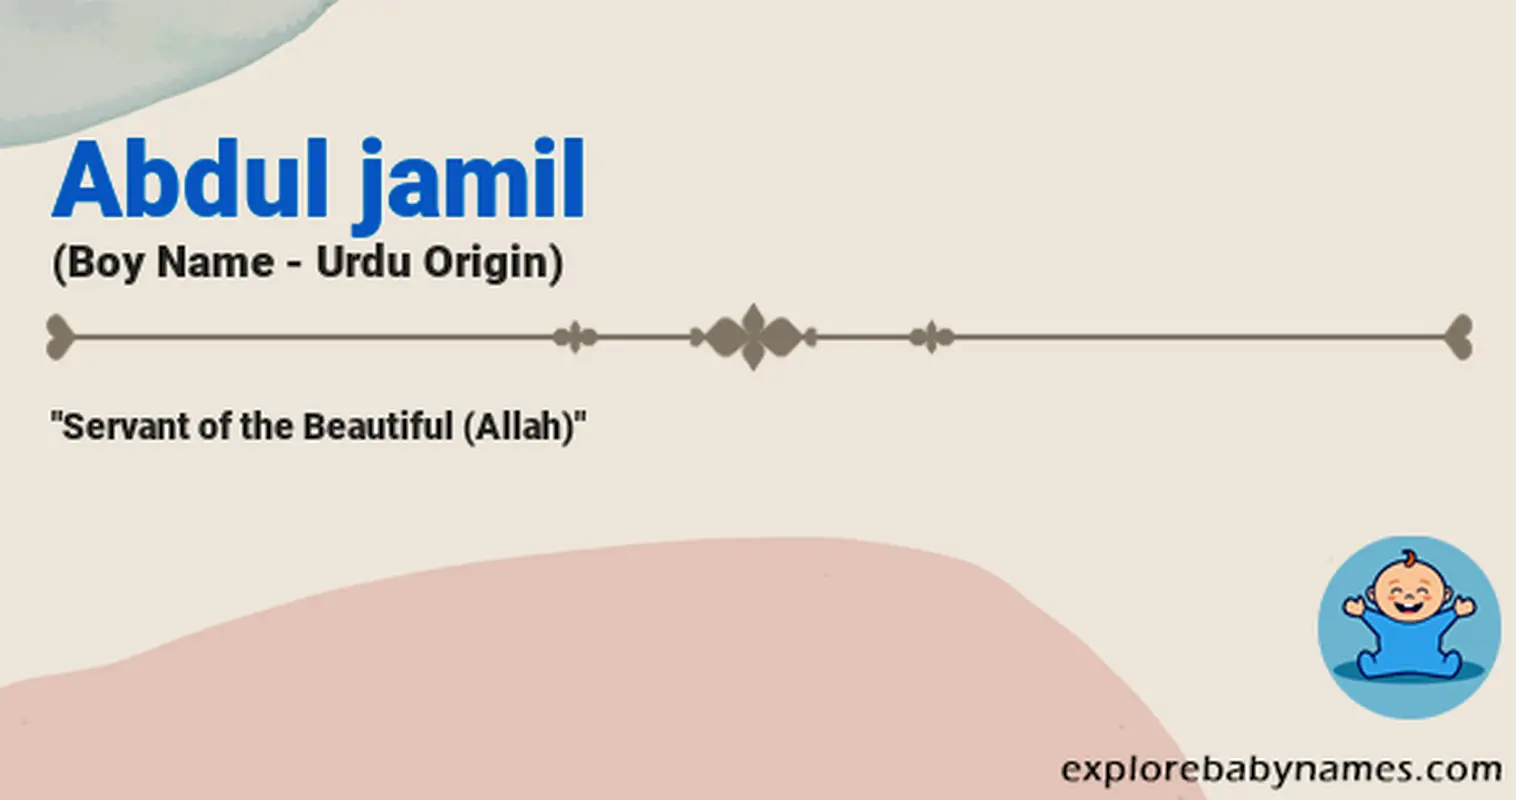 Meaning of Abdul jamil